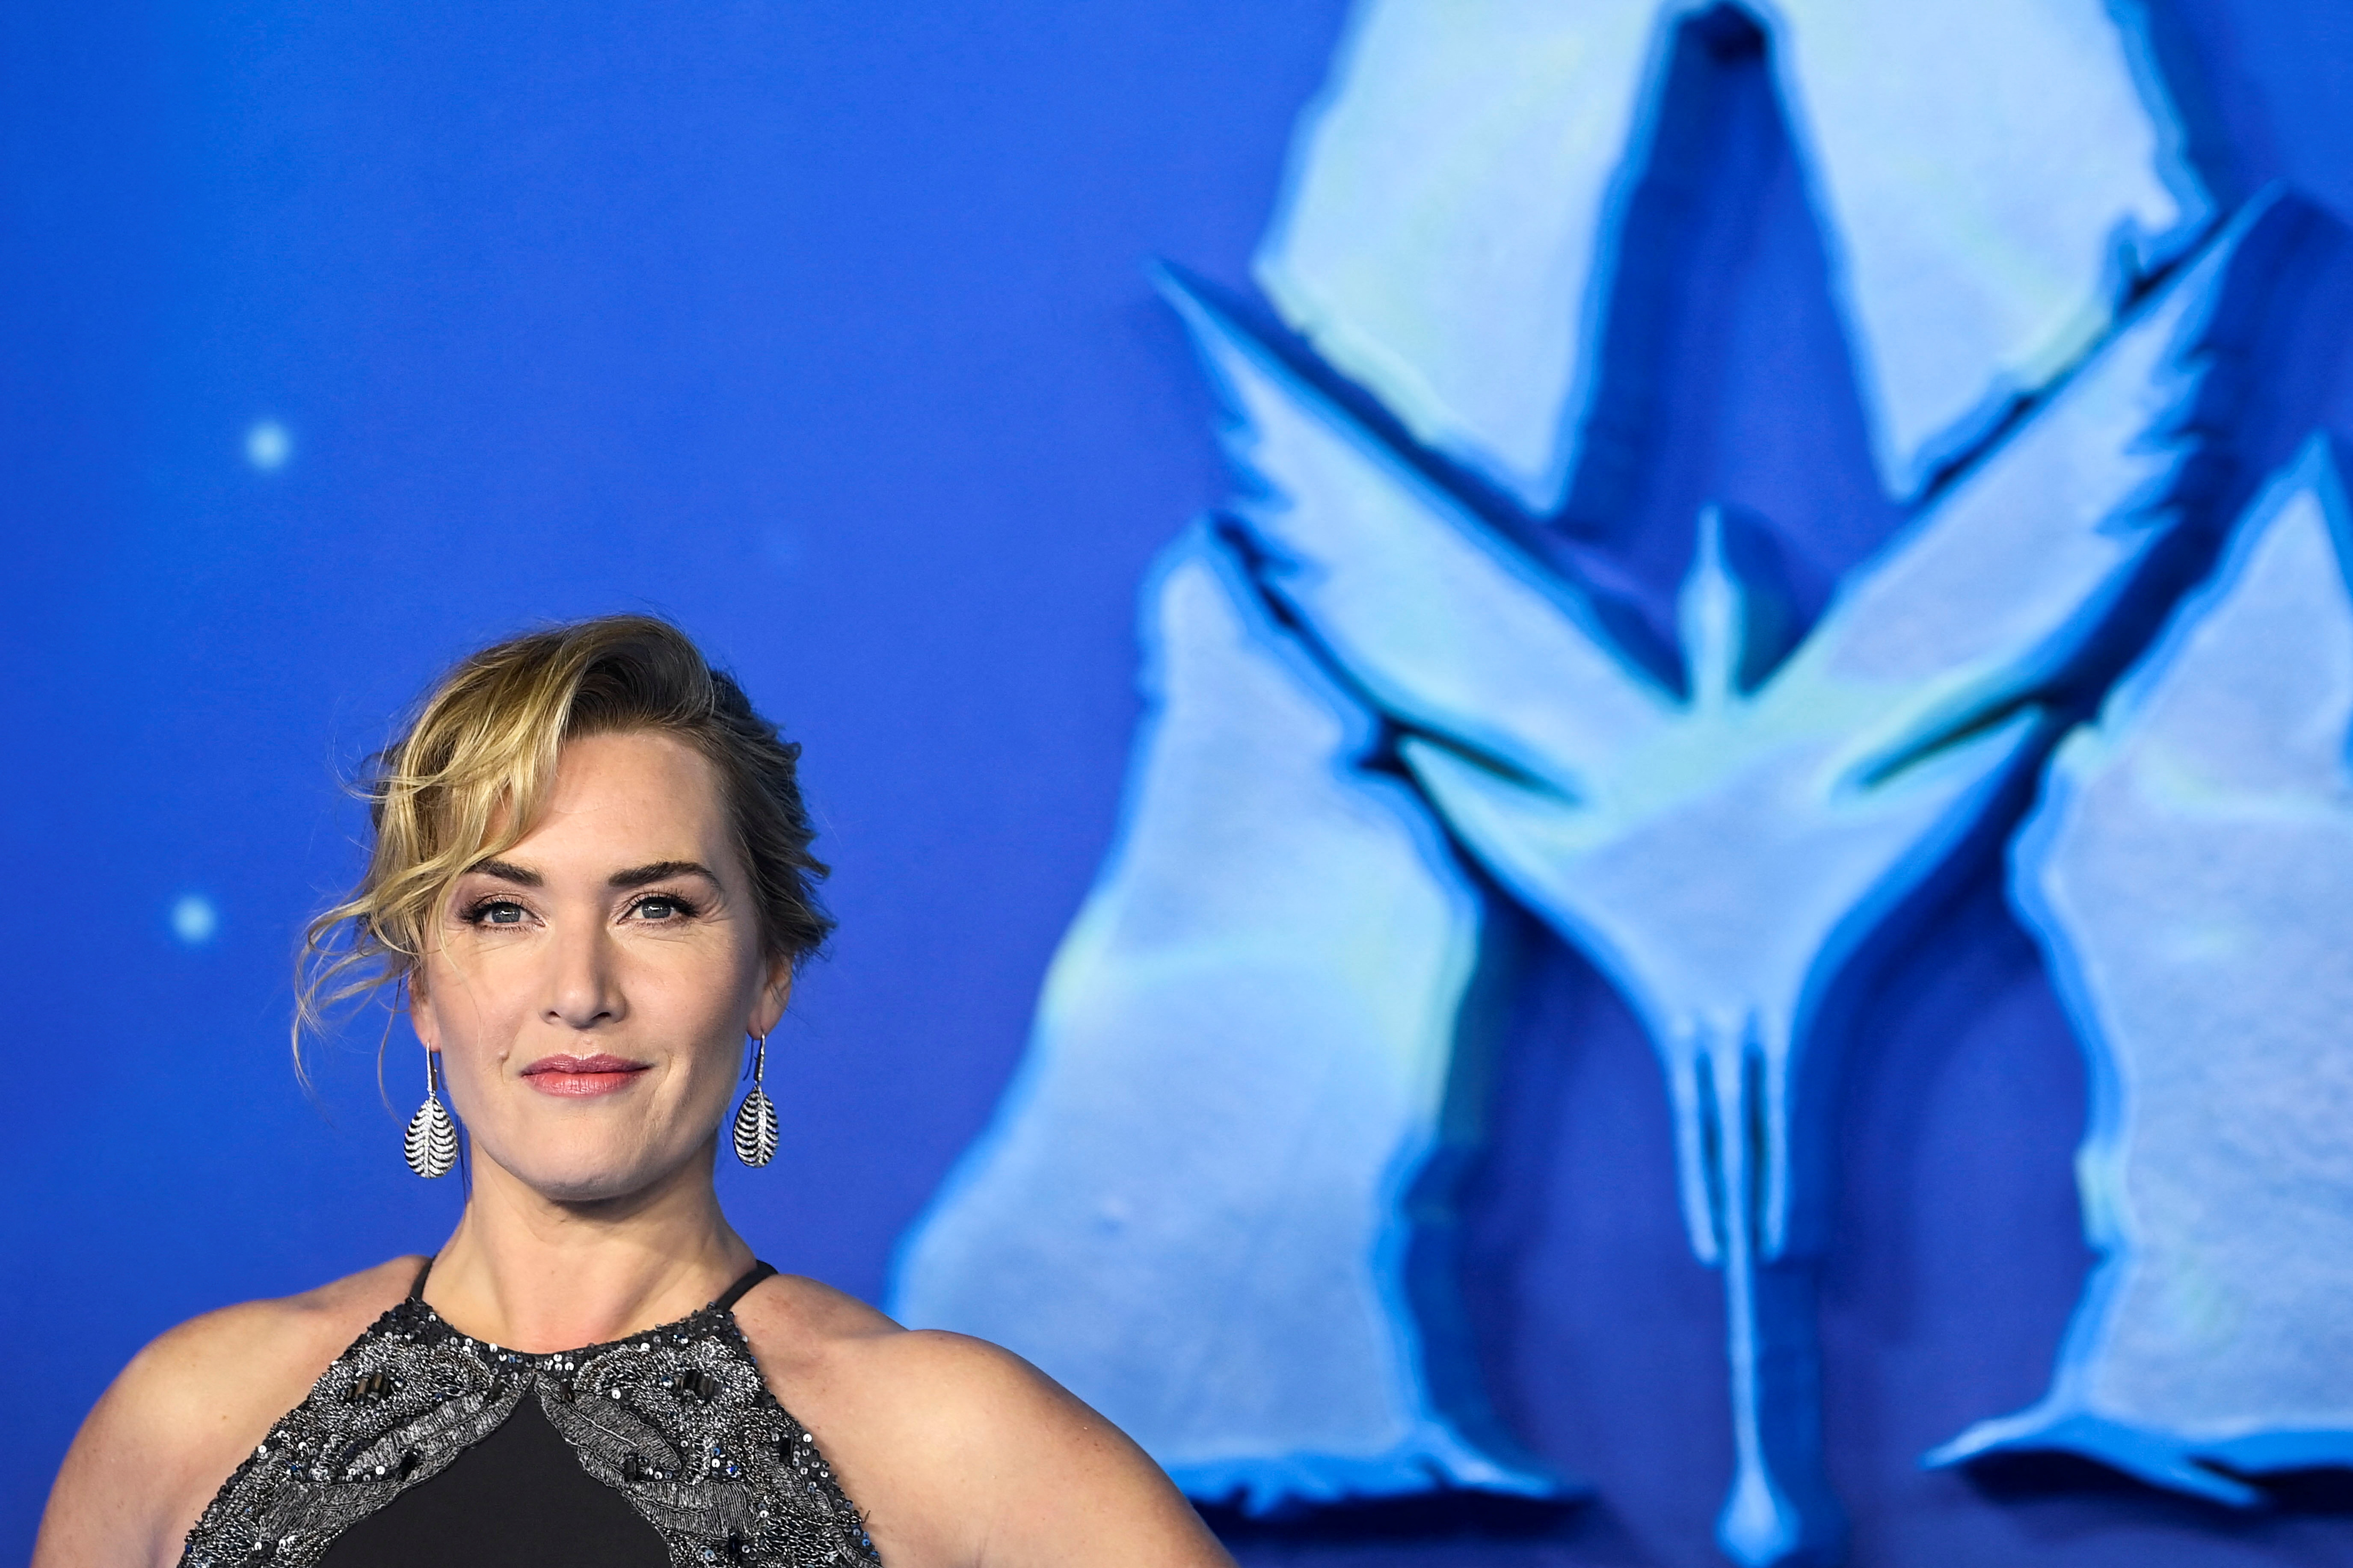 Actor Kate Winslet arrives at the world premiere of 'Avatar: The Way of Water' in London, Britain December 6, 2022. REUTERS/Toby Melville